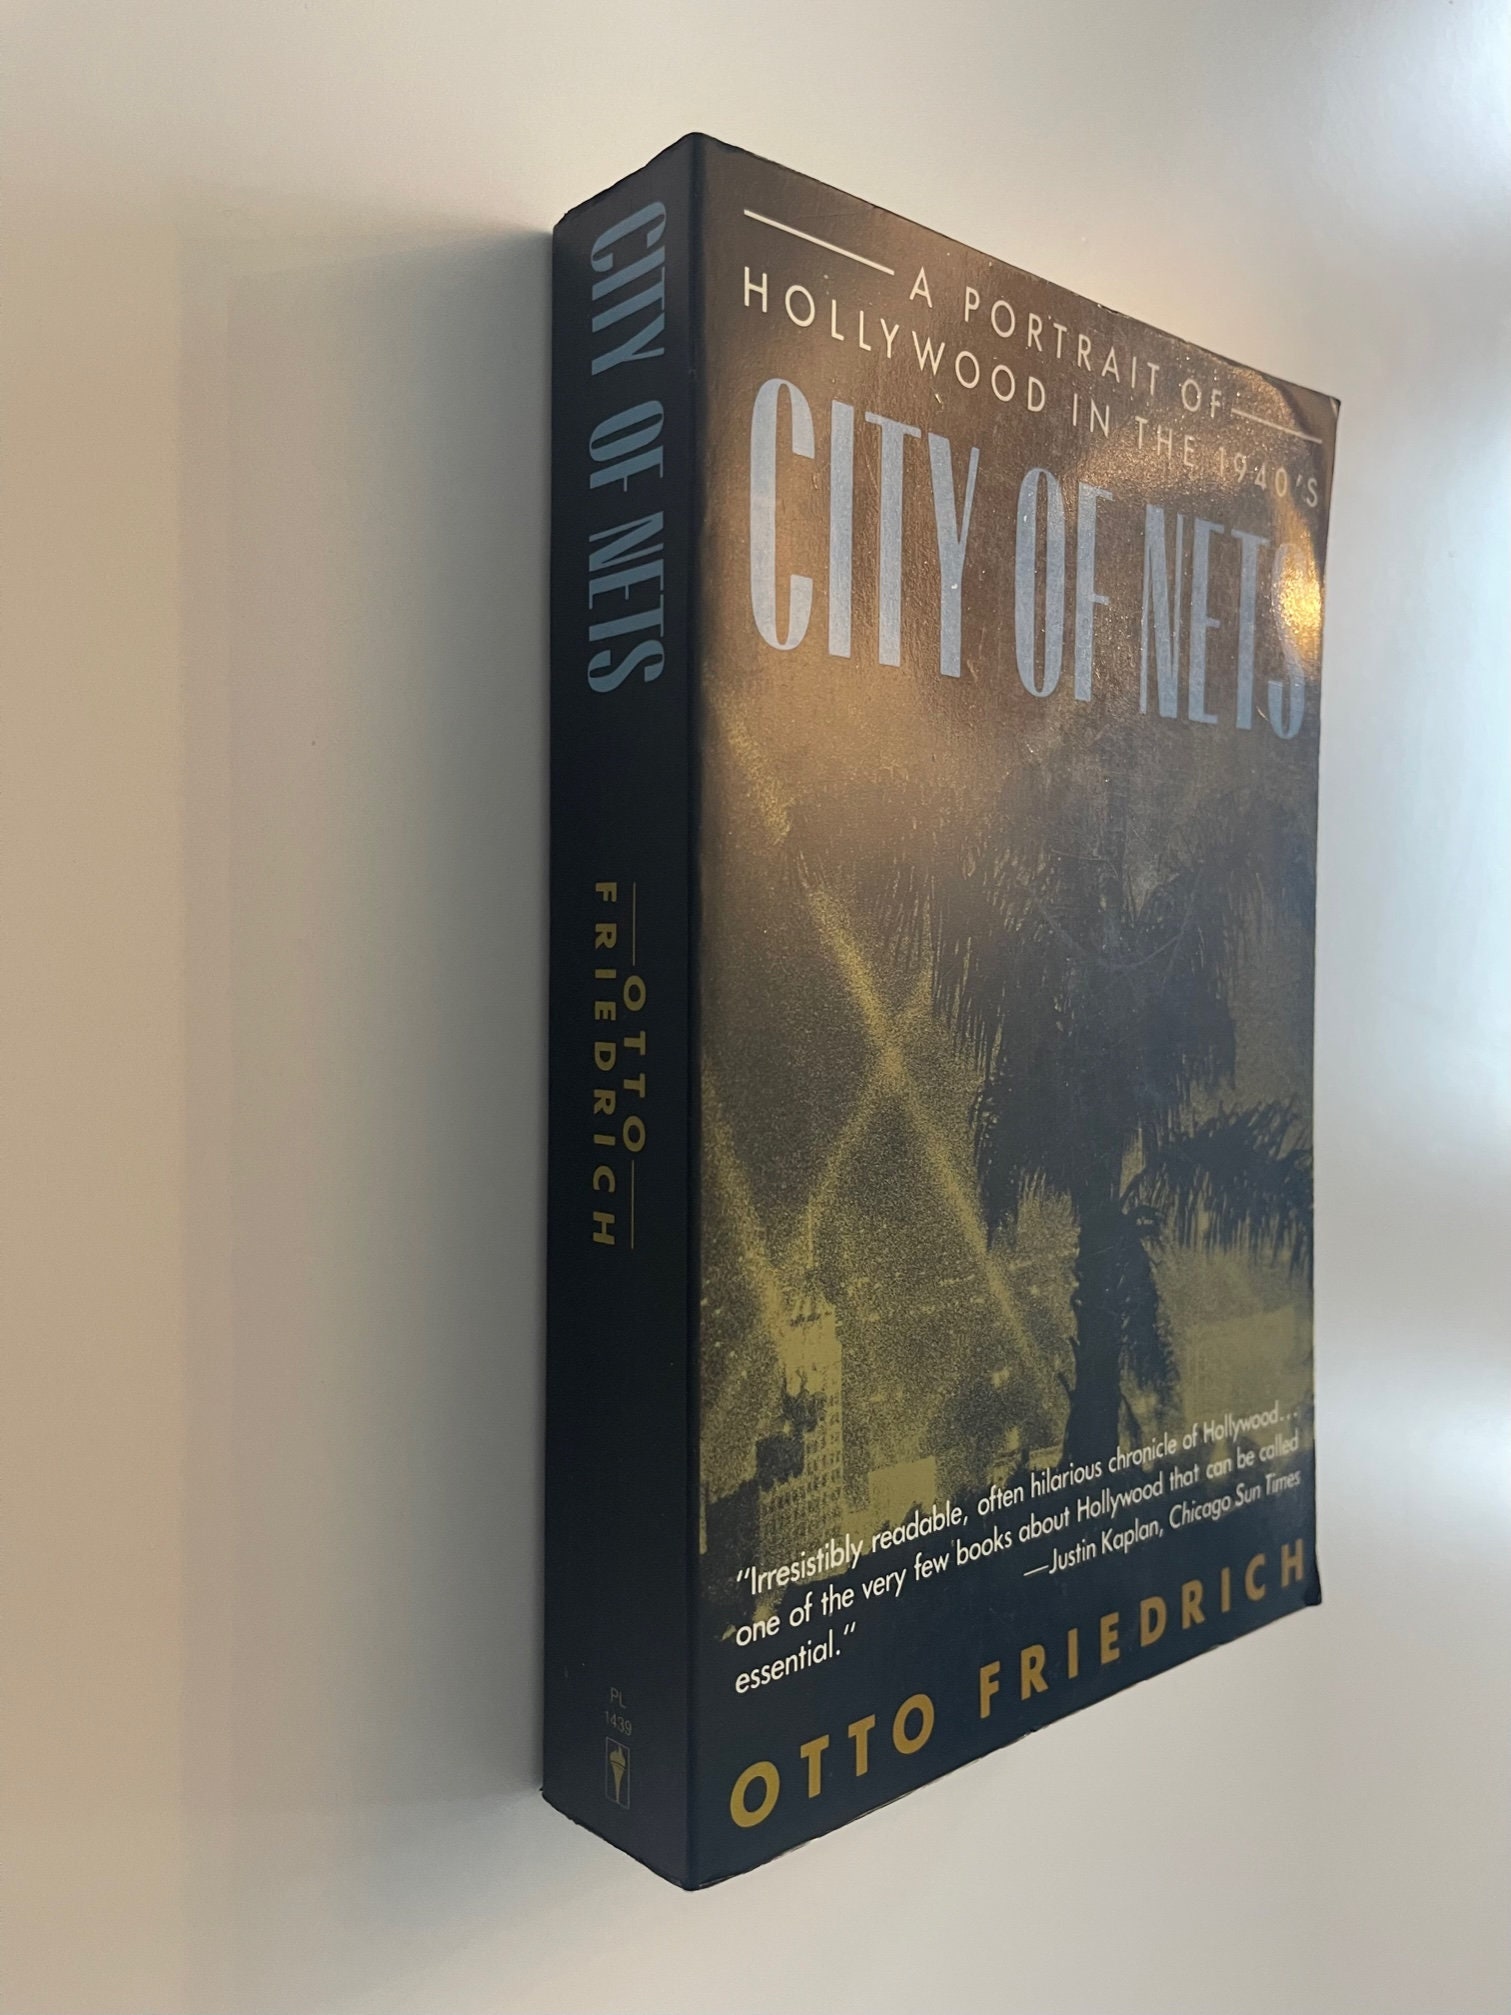 City of Nets: A Portrait of Hollywood in the 1940s by Otto Friedrich